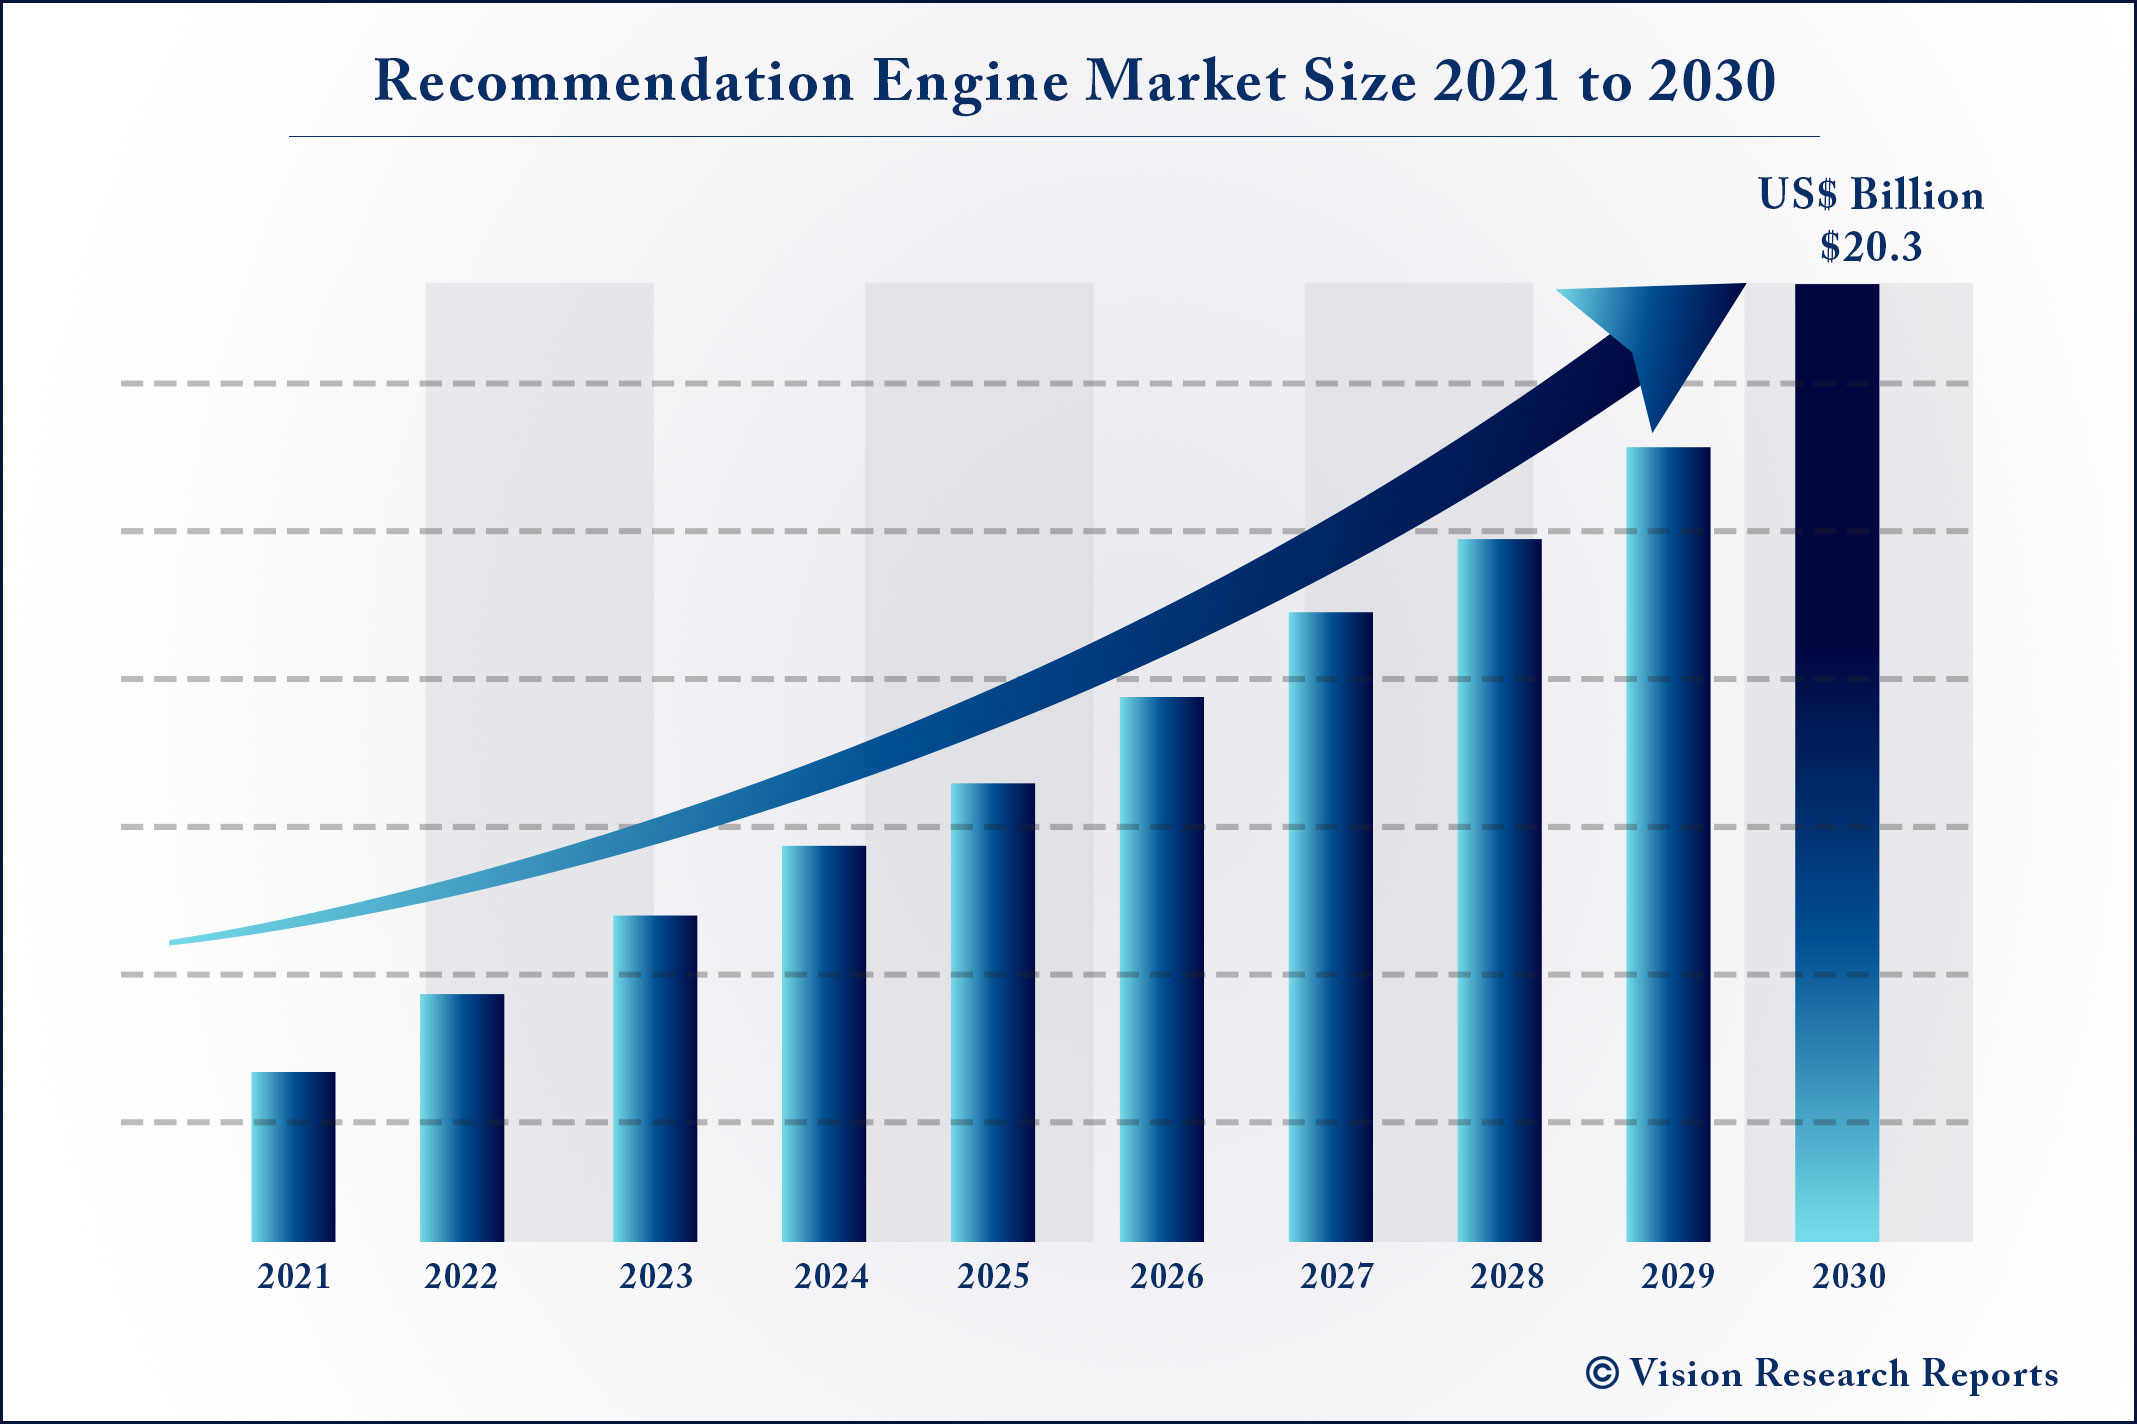 Recommendation Engine Market Size 2021 to 2030